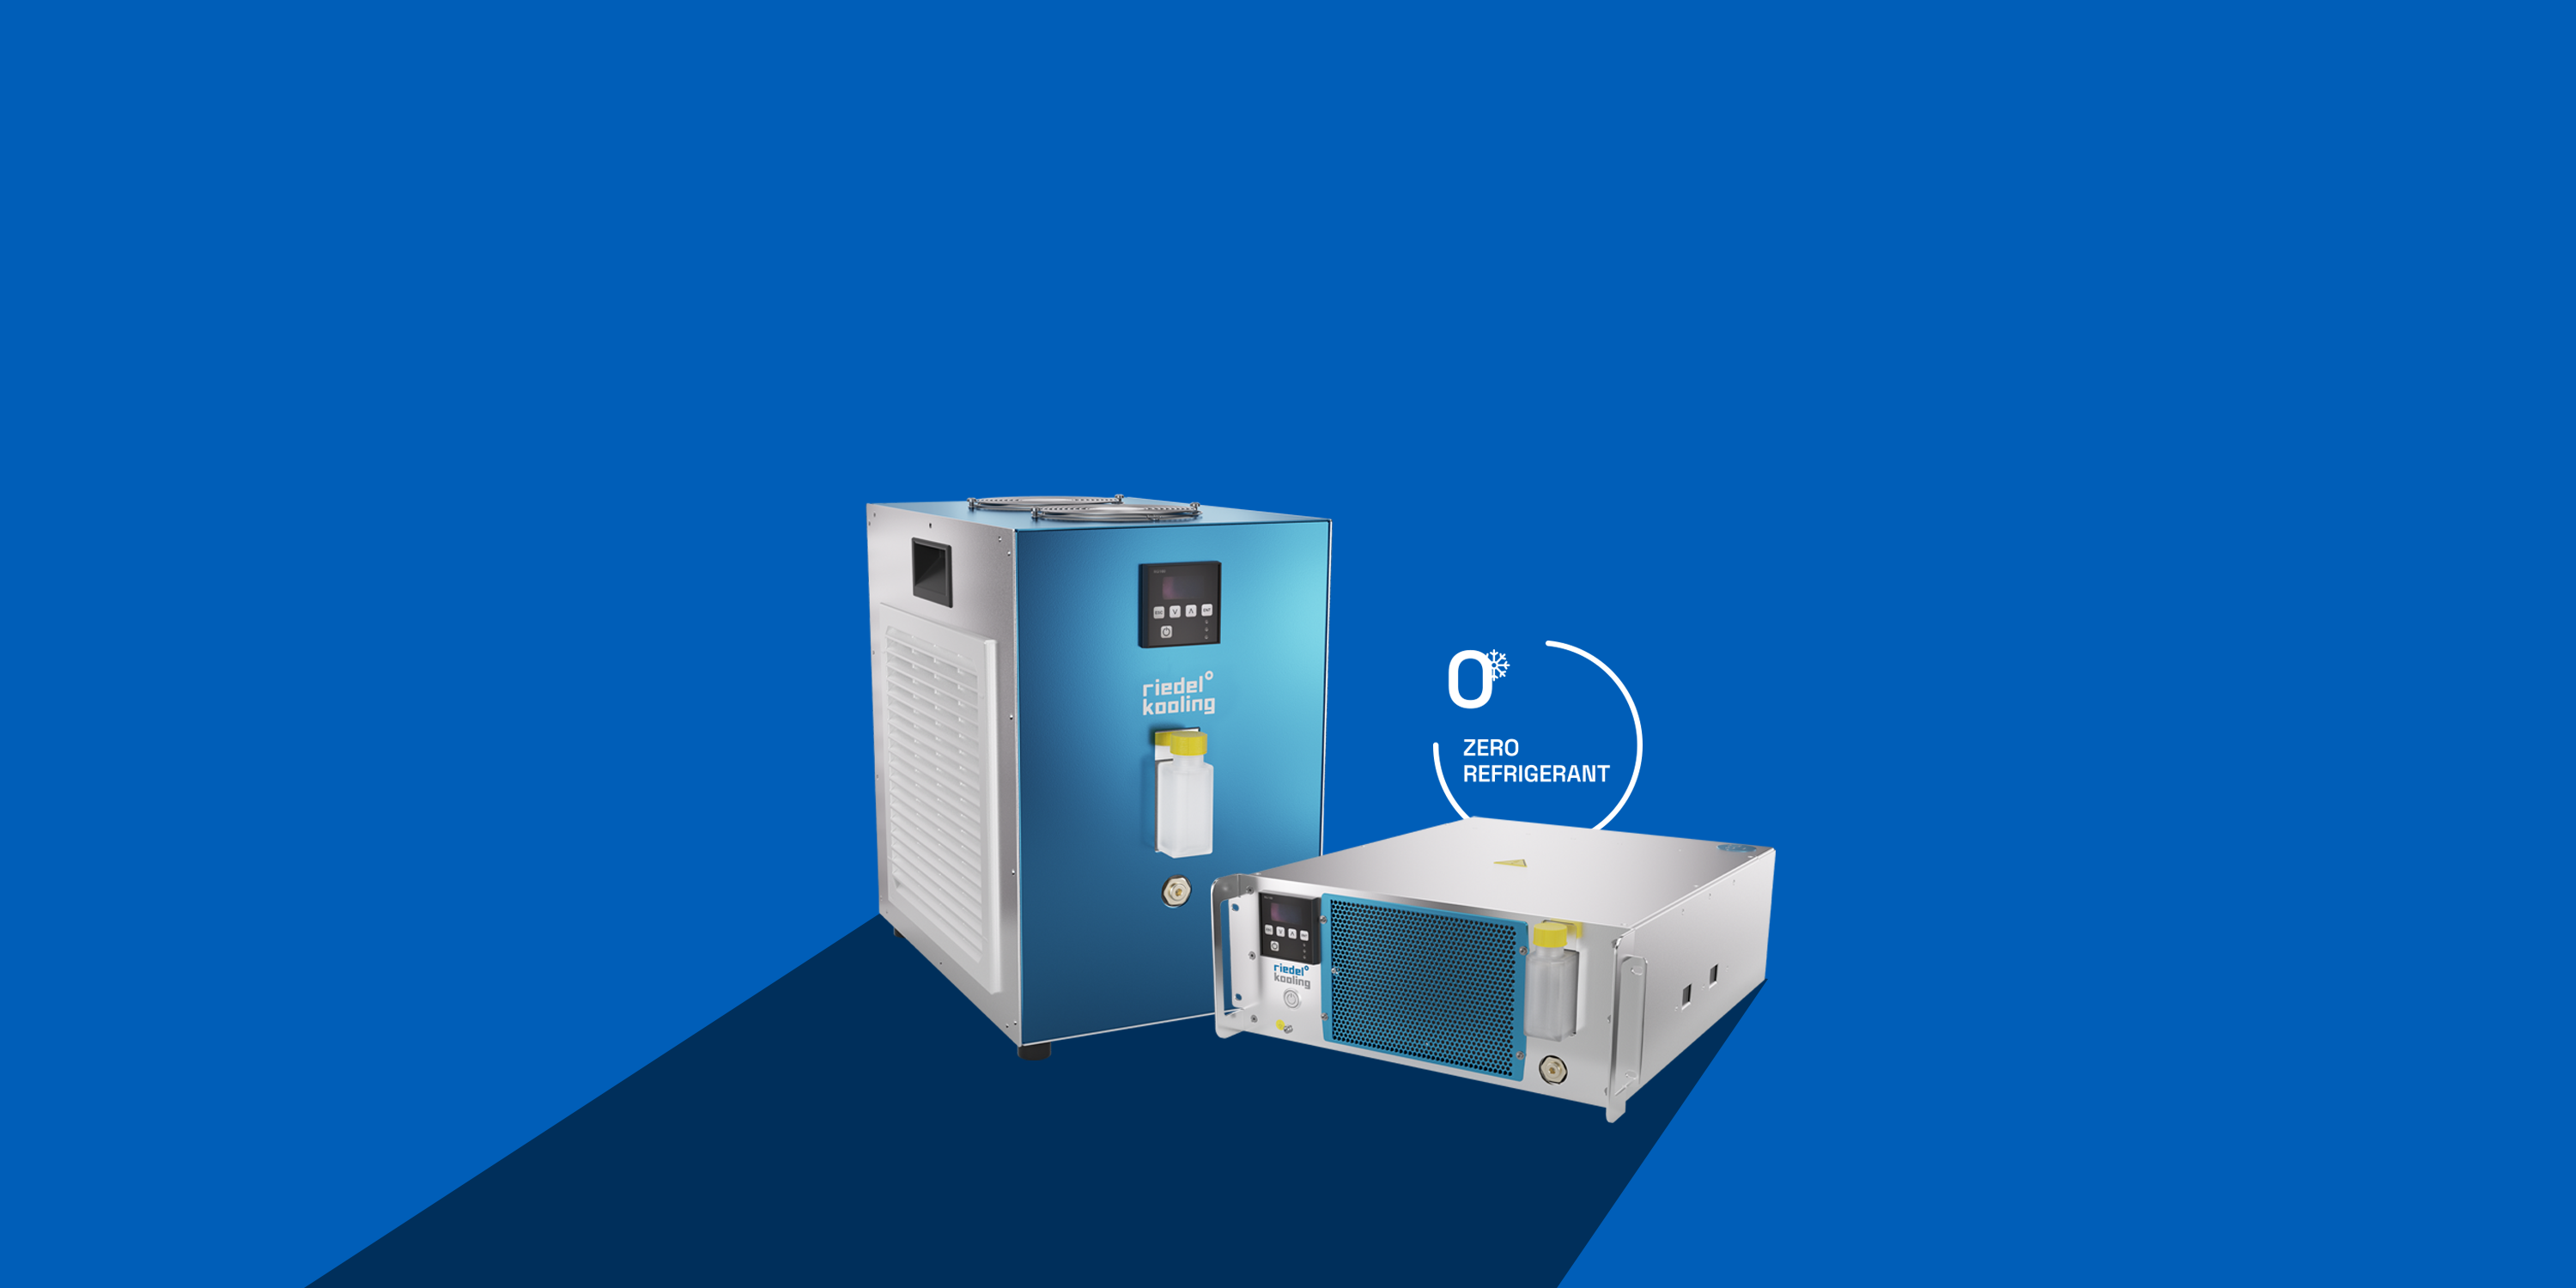 Refrigerant-free cooling solution with cooling capacities up to 350 W for medical and laboratory analysis technology as well as complex laser systems in the low power range, Peltier-Chiller